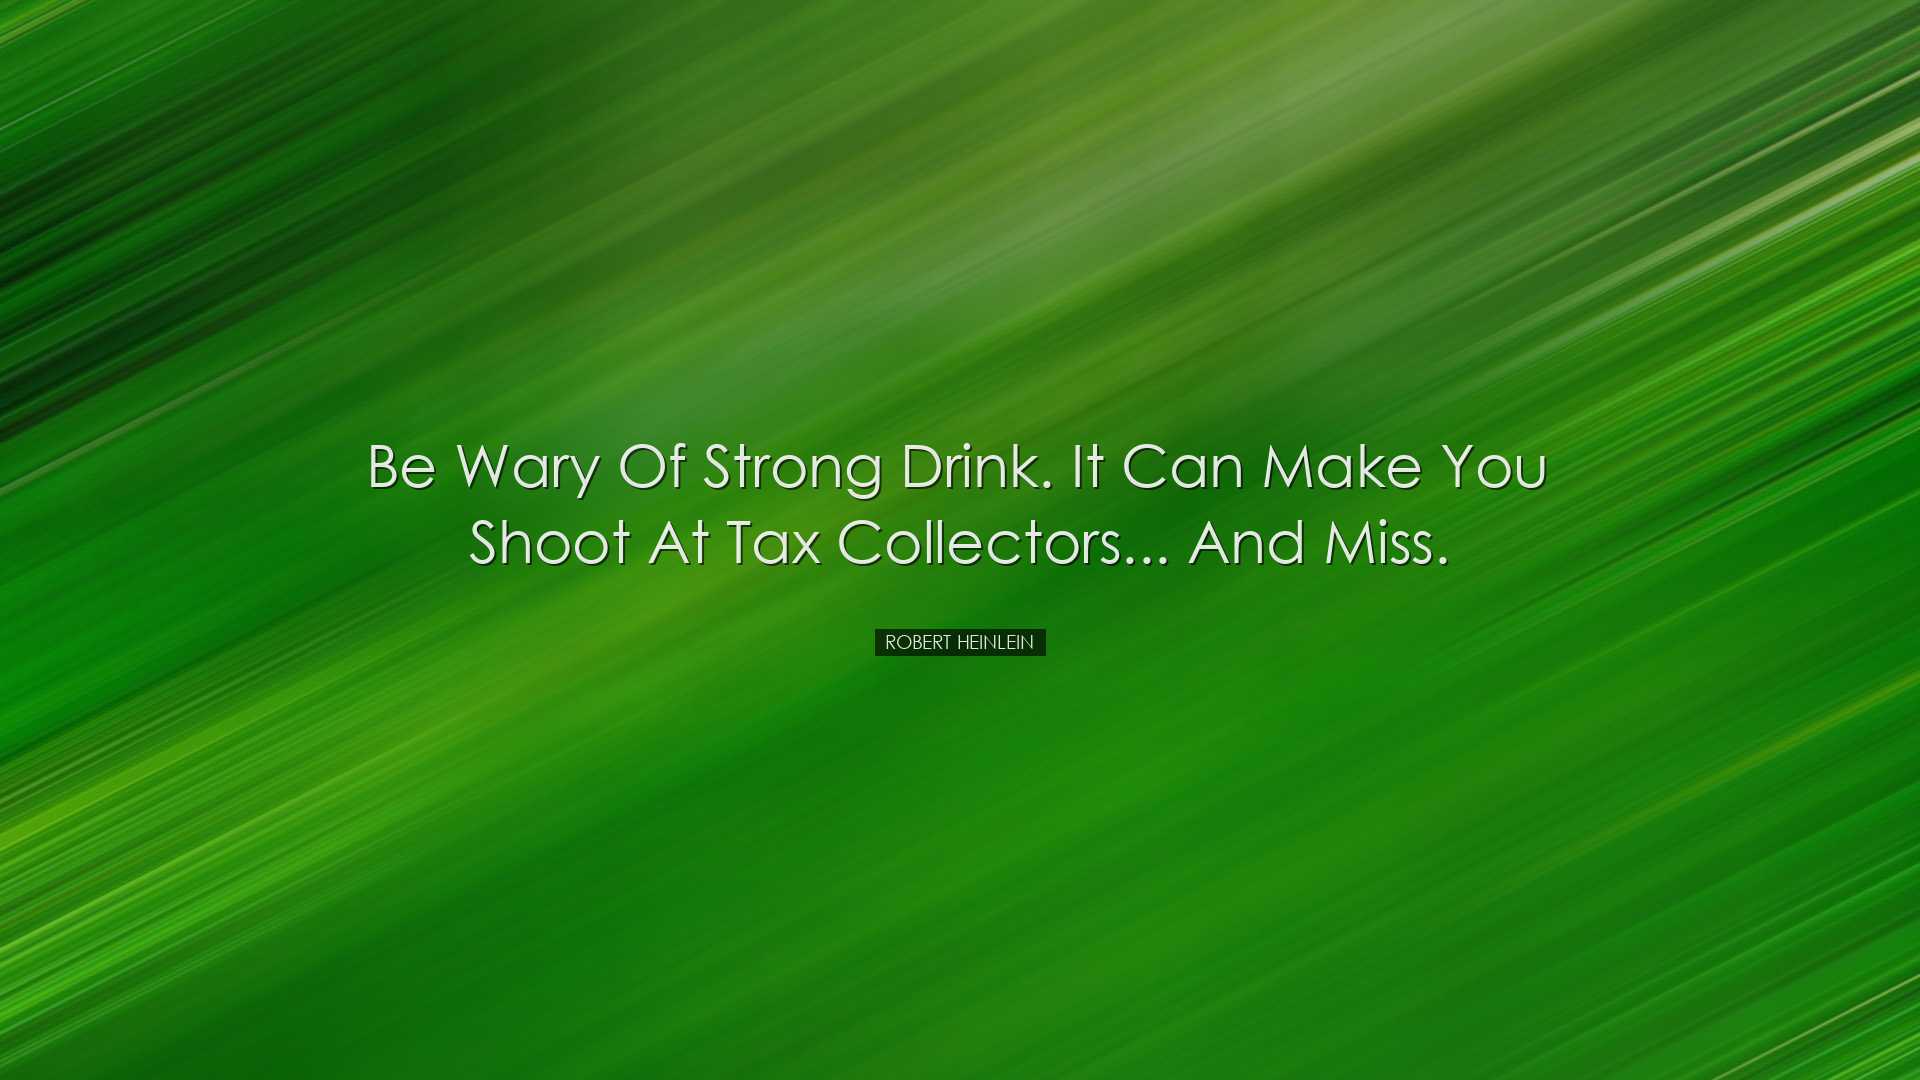 Be wary of strong drink. It can make you shoot at tax collectors..